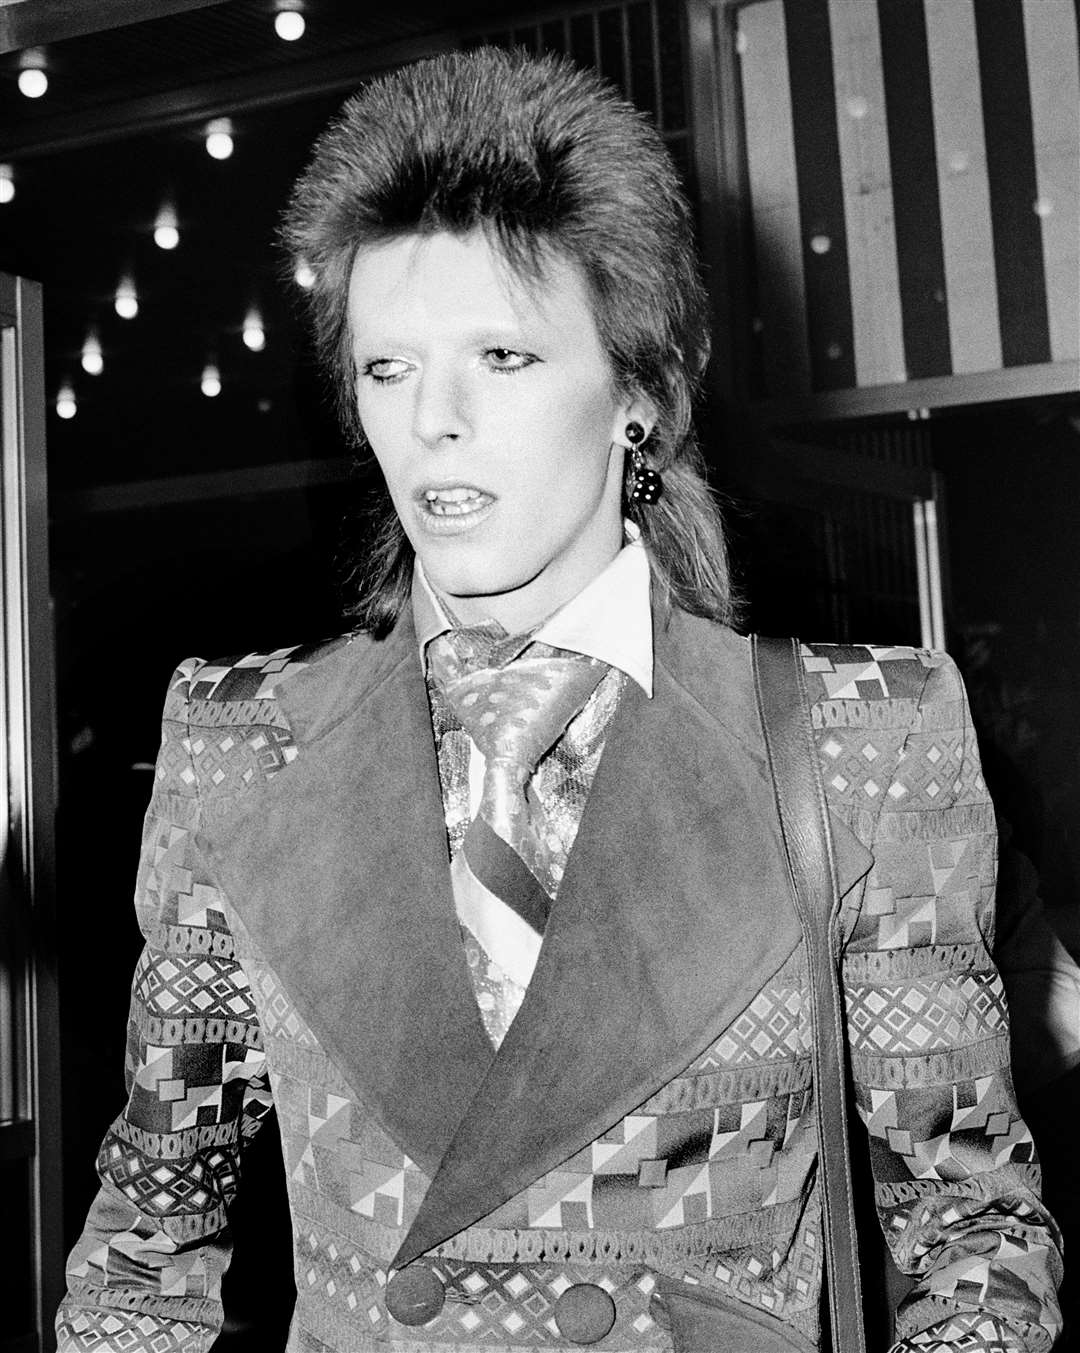 David Bowie as Ziggy Stardust pictured in 1972 (PA)